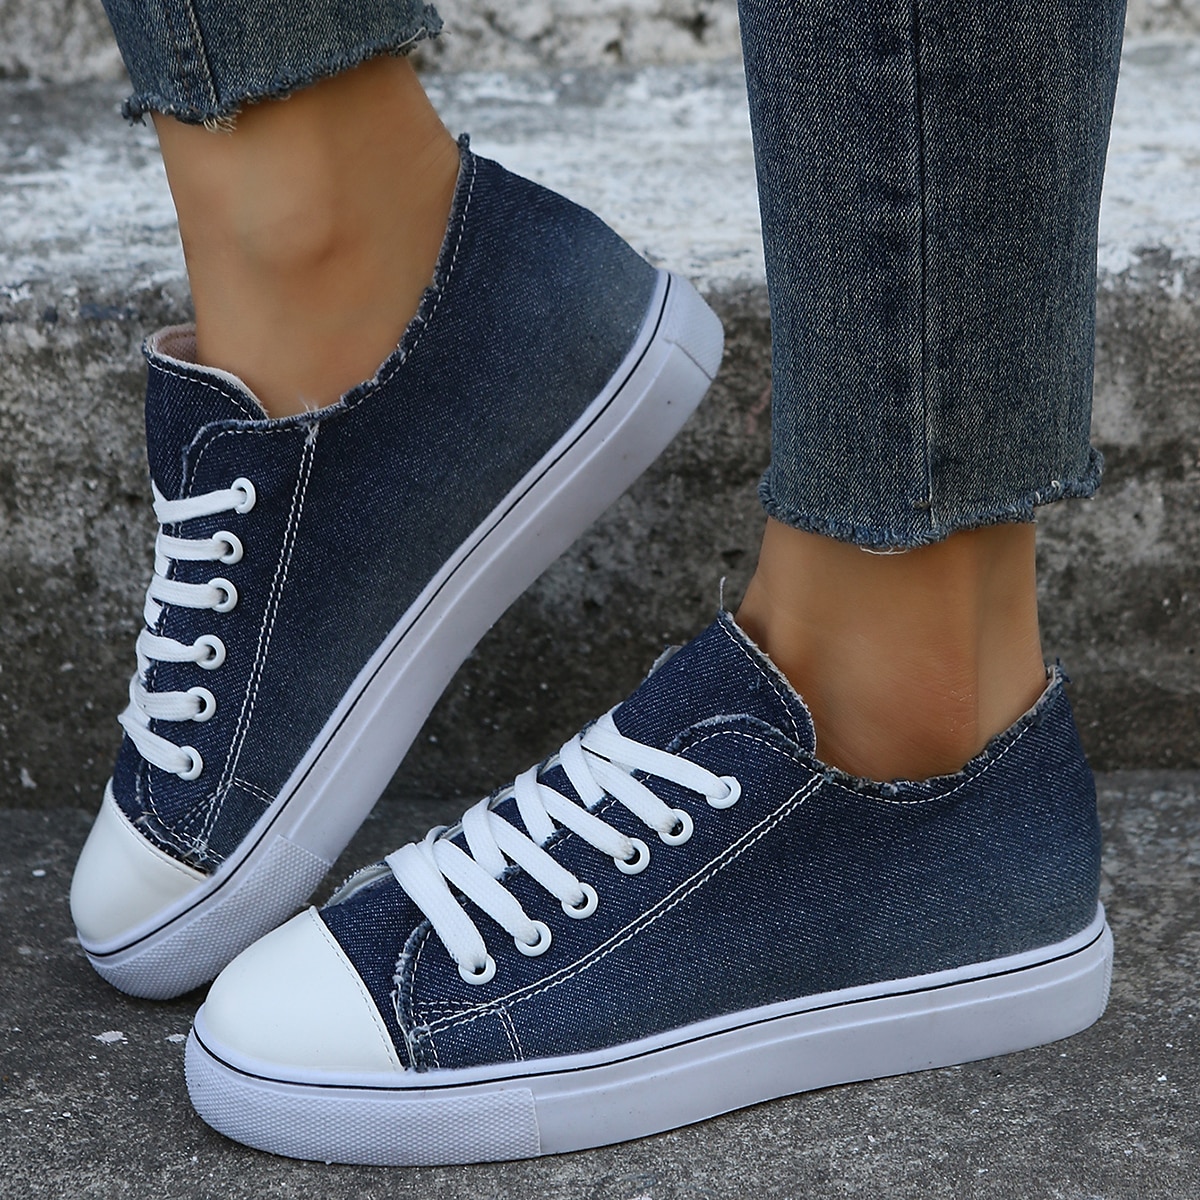 Women Sneakers Big Size 35-43 Canvas Shoes Woman, 42% OFF